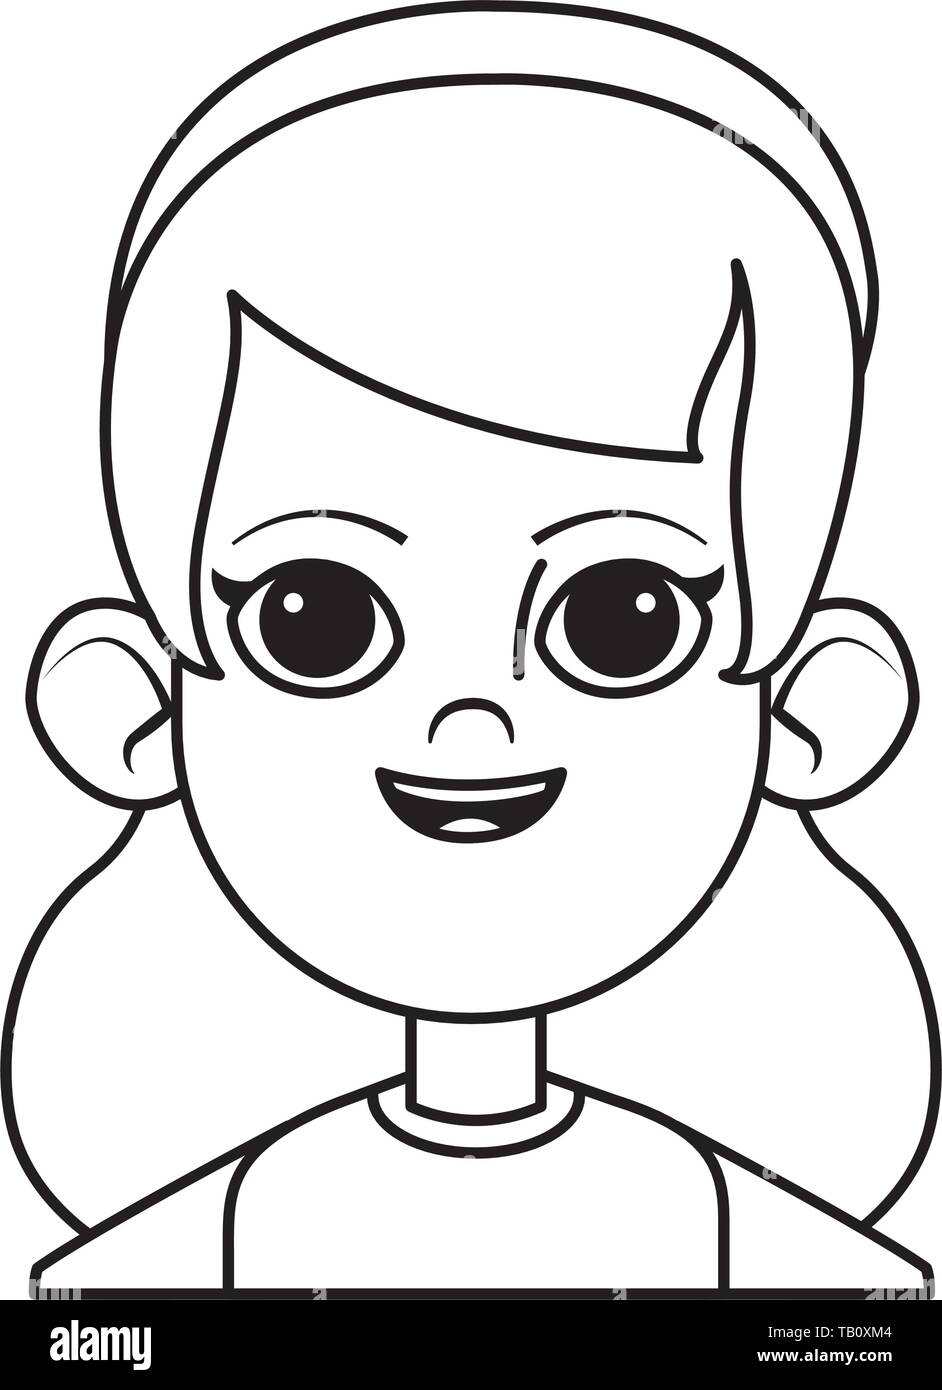 little kid avatar profile picture black and white Stock Vector Image ...